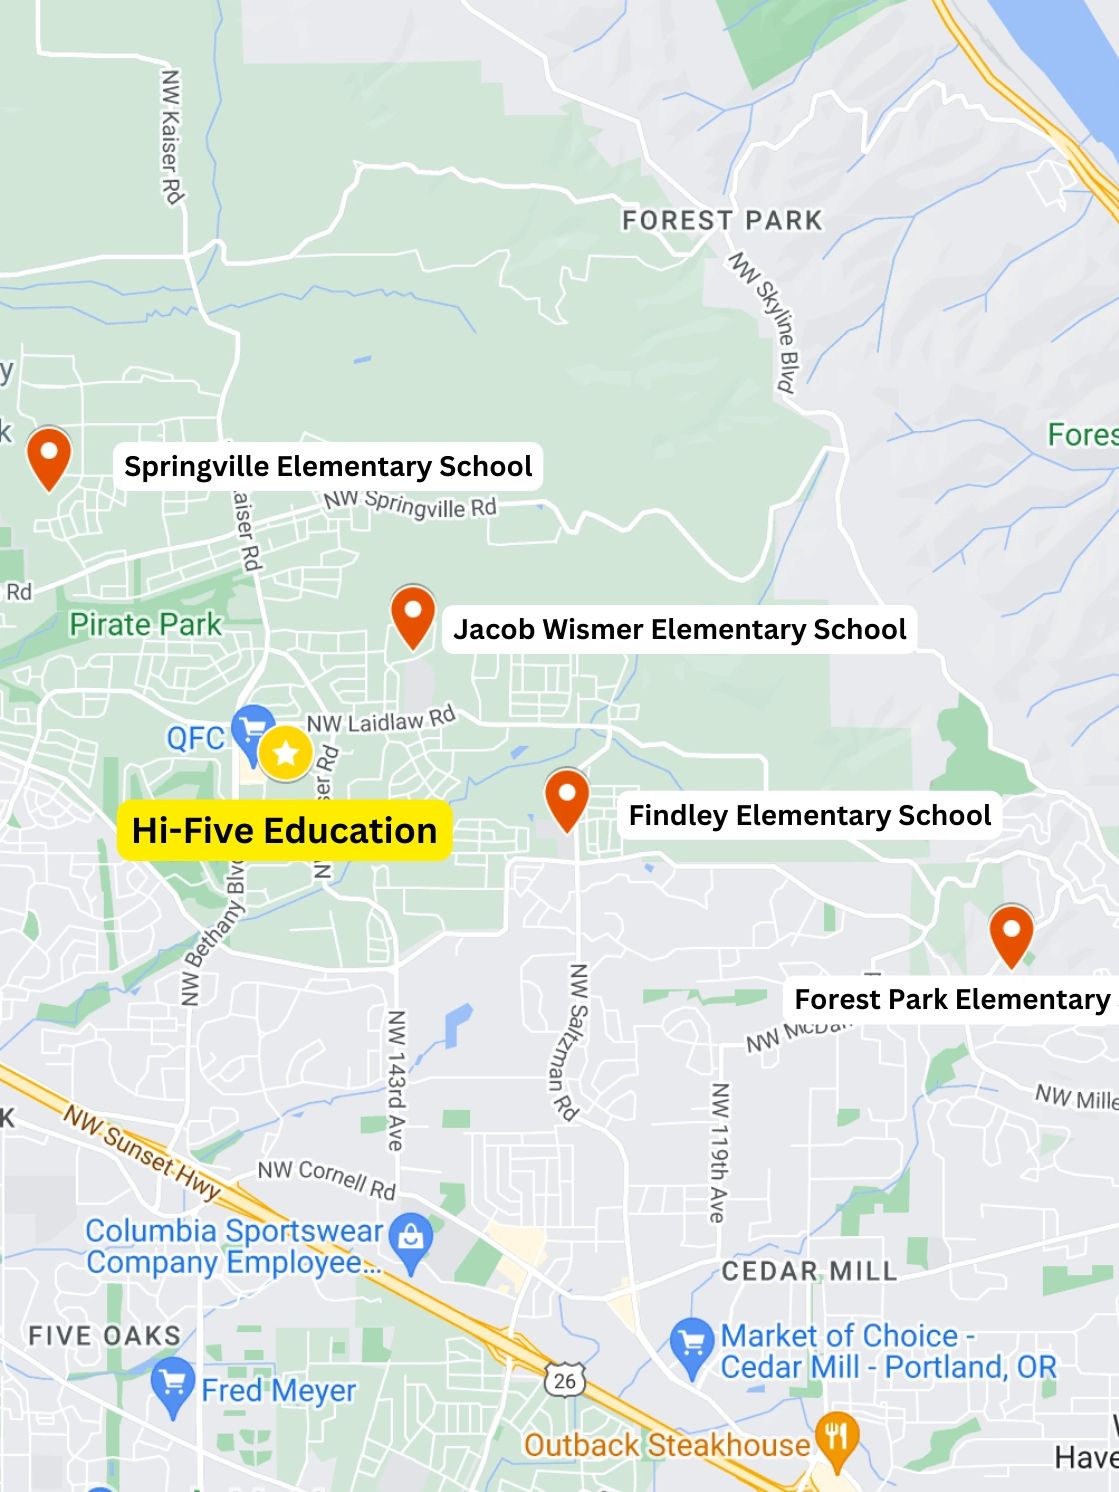 Map of Hi-Five Education in between the local schools in the area.